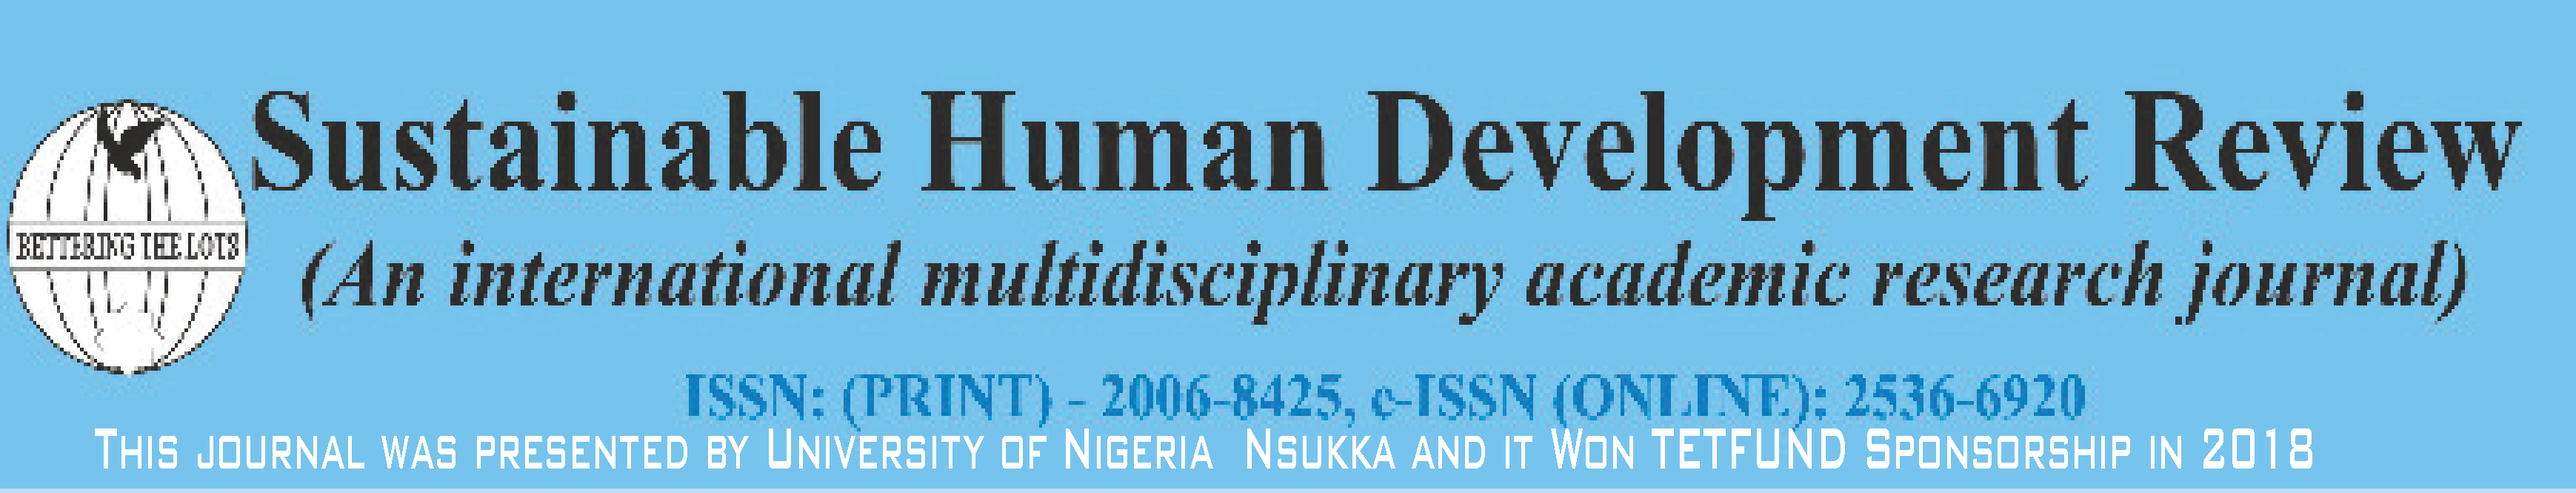 Sustainable Human Development Review